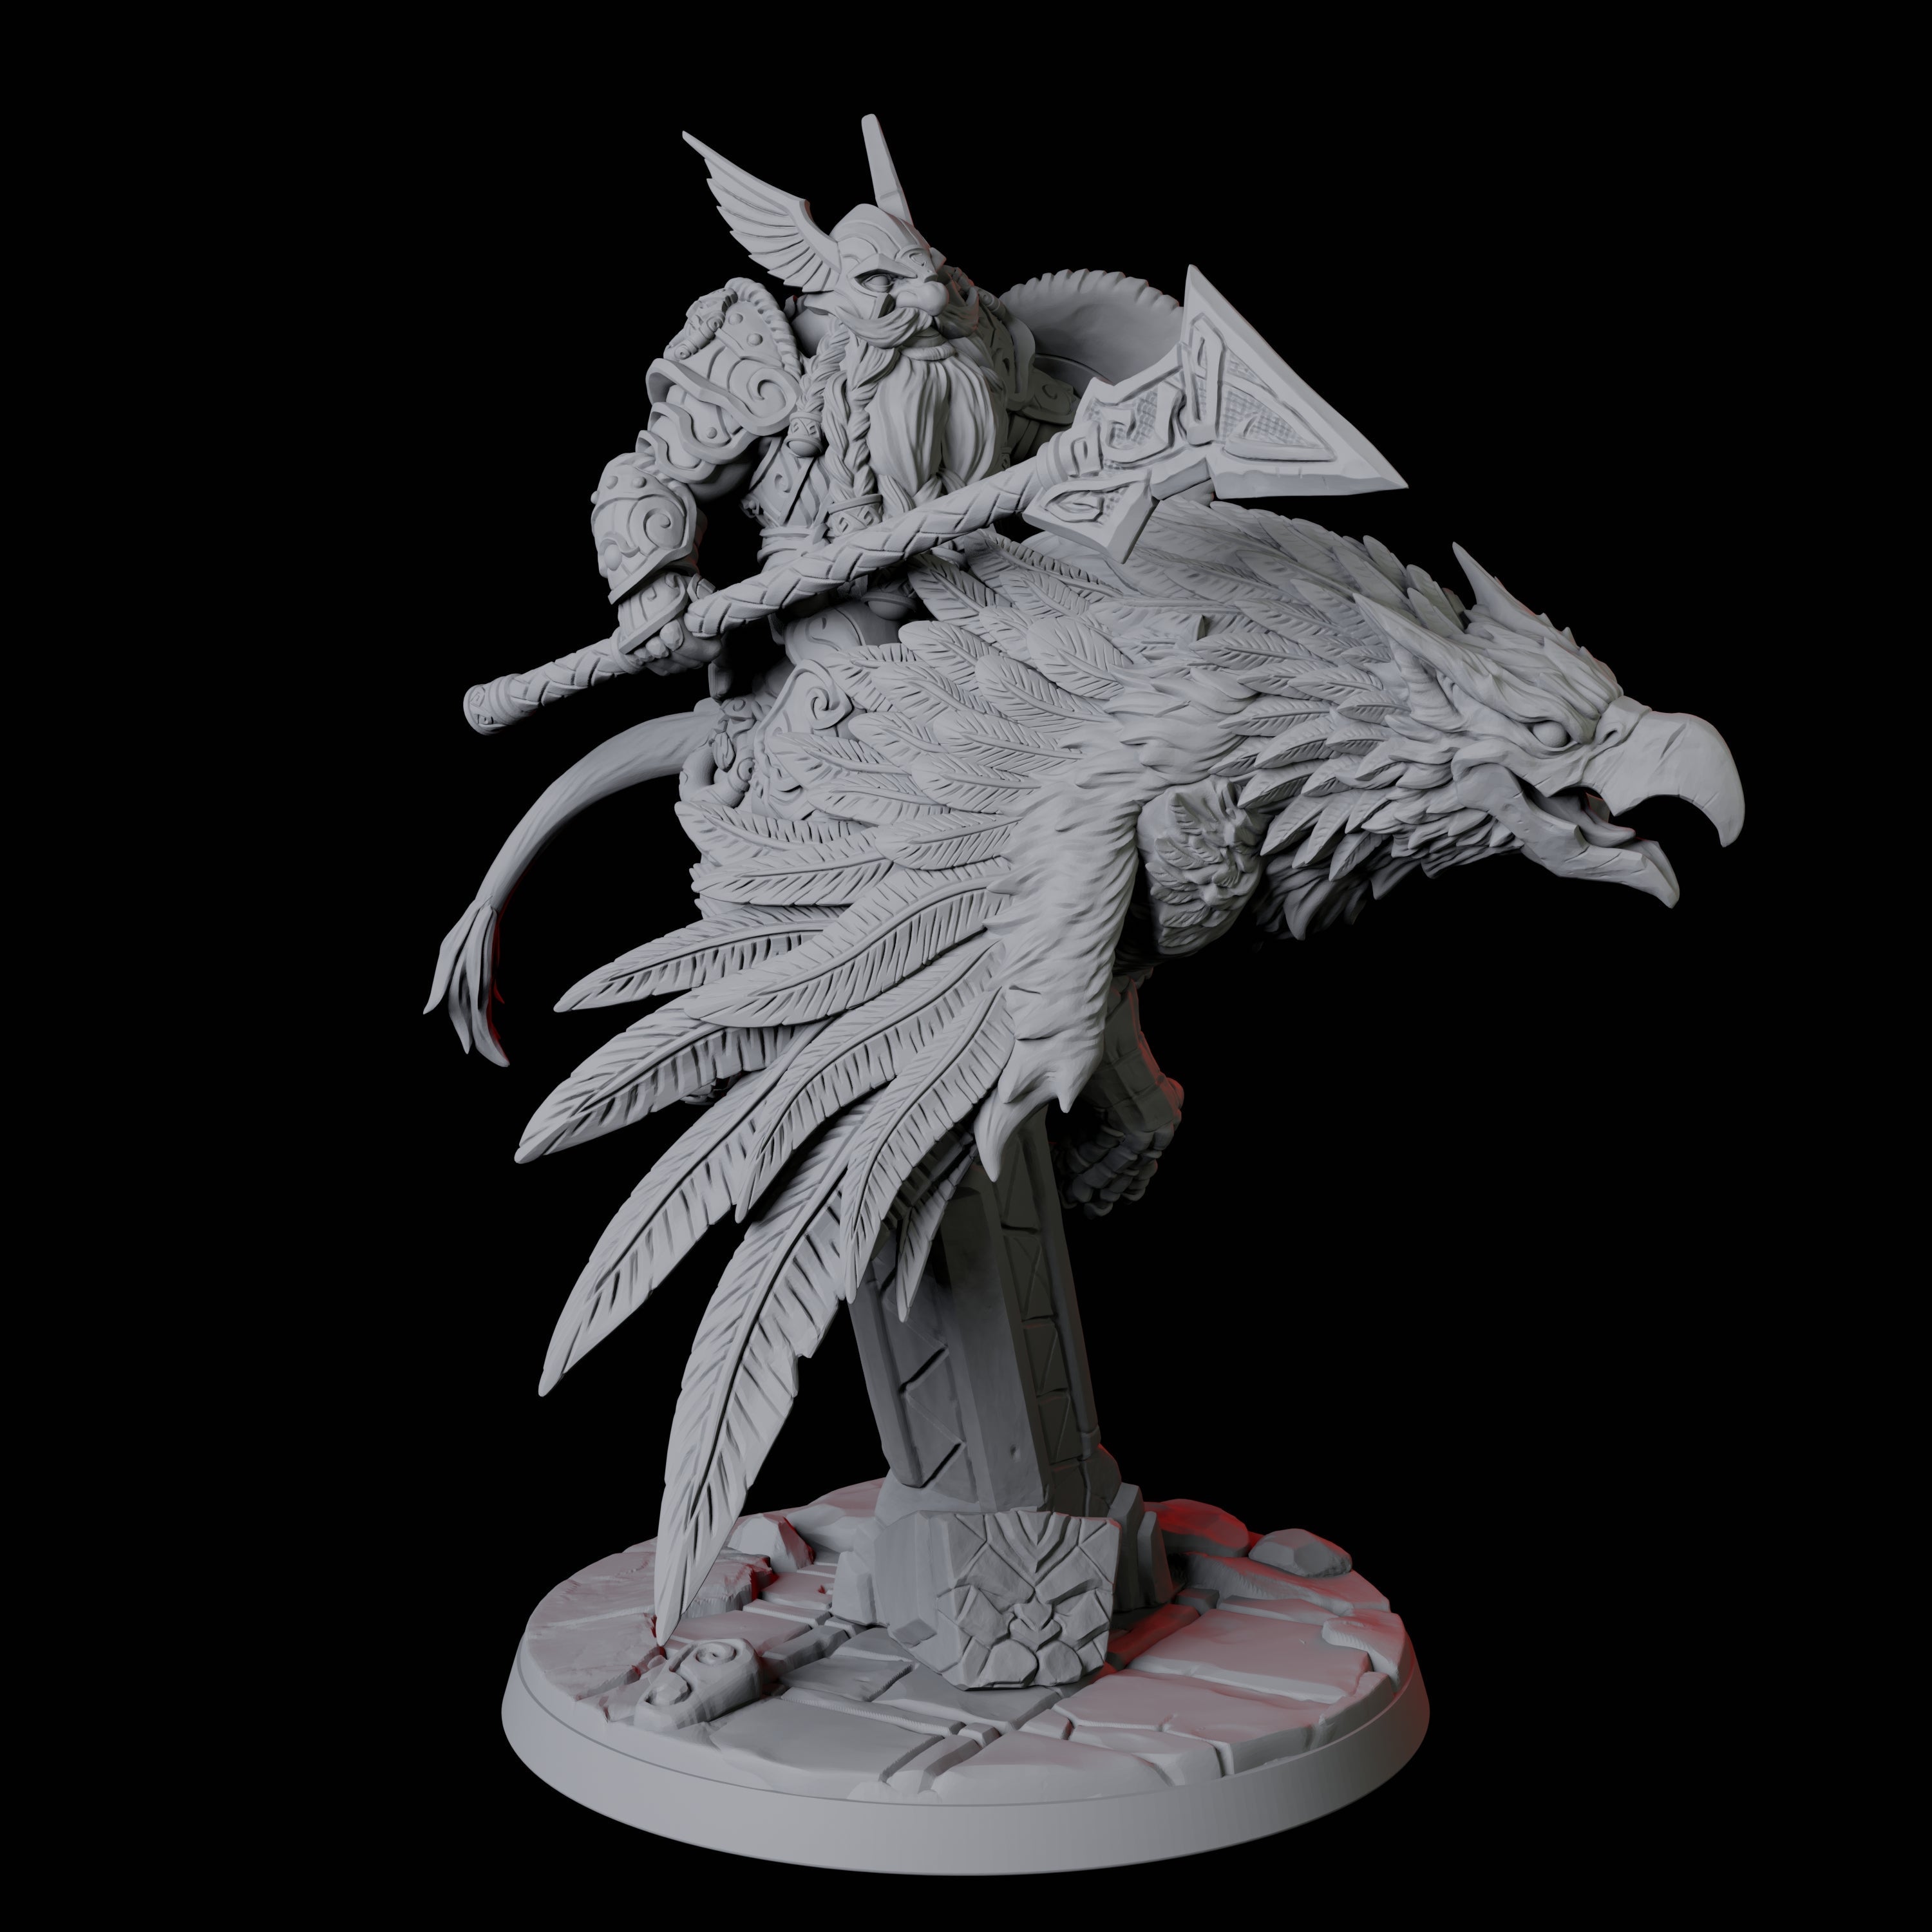 Dwarf Sky Cavalry B Miniature for Dungeons and Dragons, Pathfinder or other TTRPGs